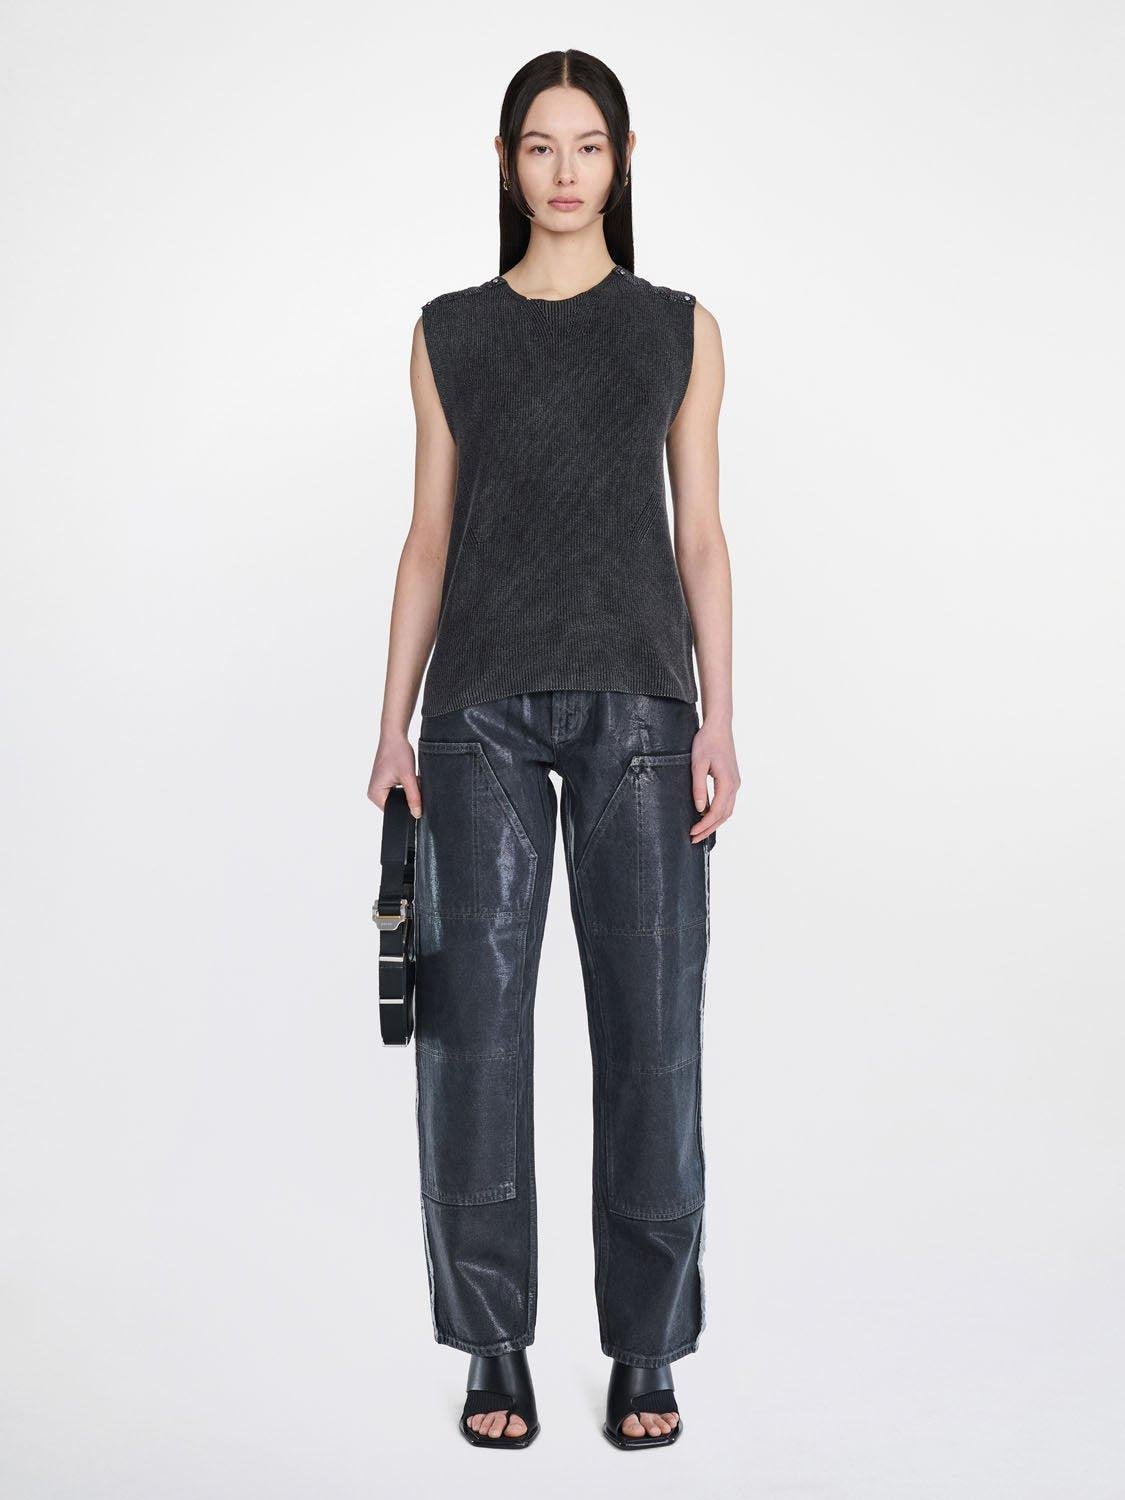 LAMINATED CARPENTER JEAN by DION LEE